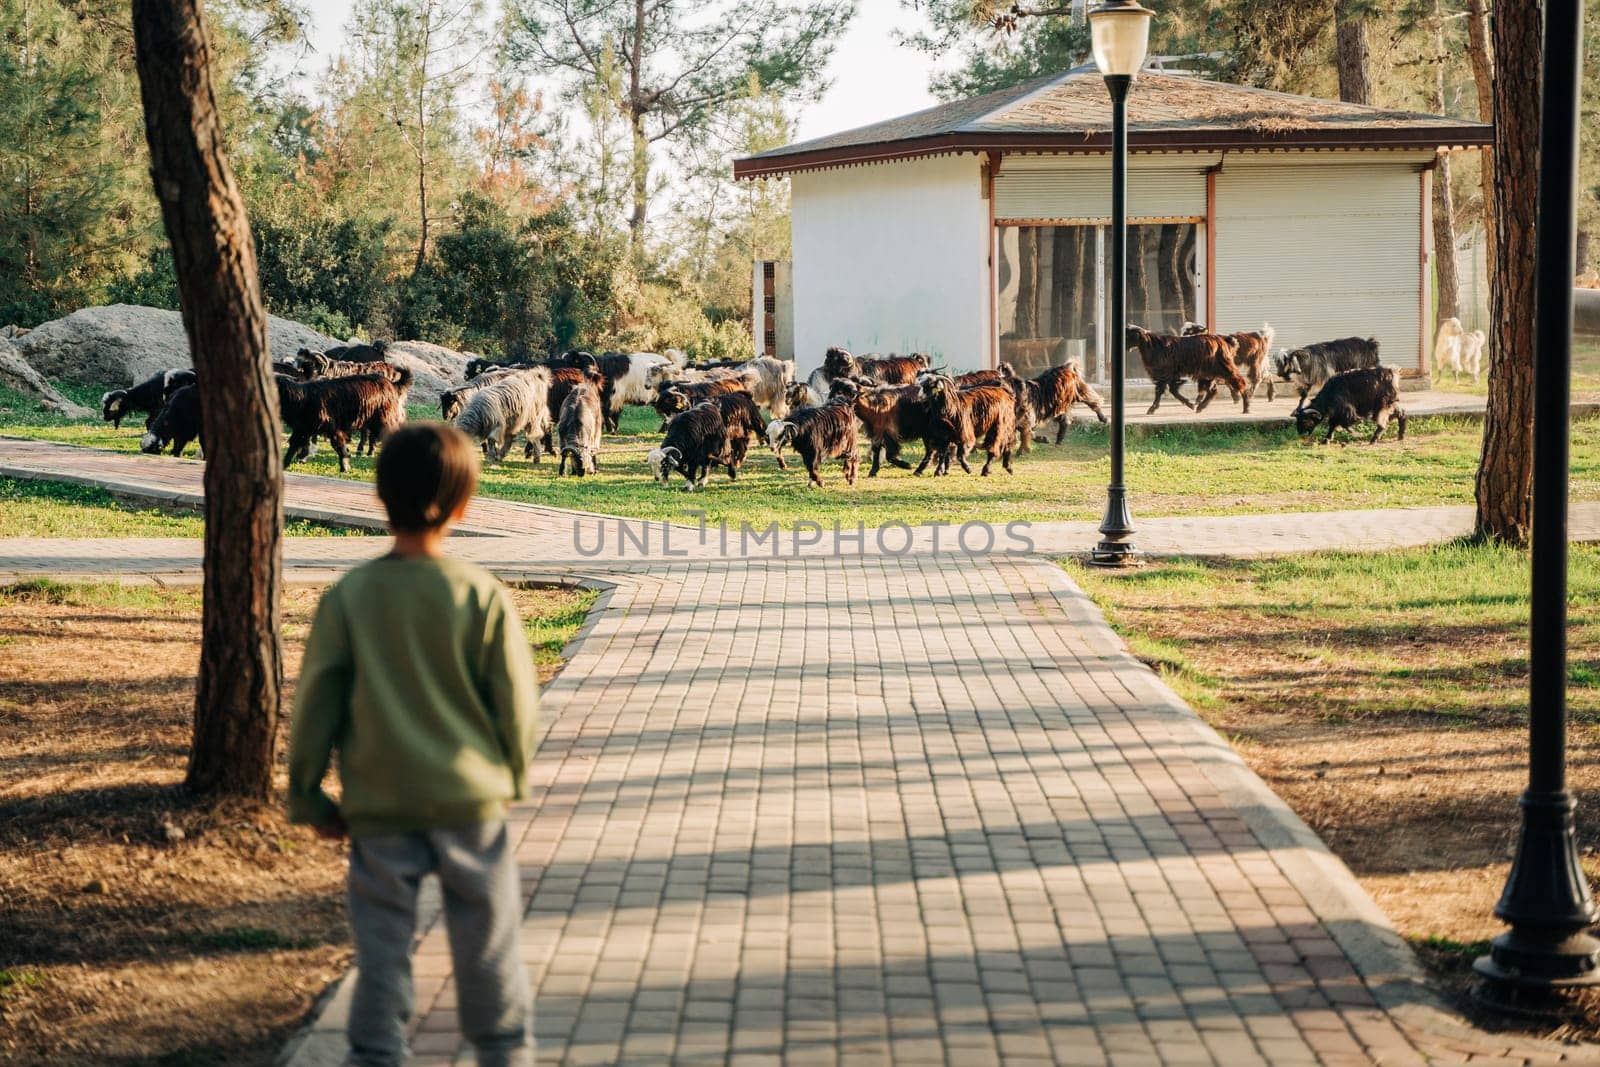 A back portrait of a little farmer boy child looking after a herd of sheep while the flock is grazing on a meadow grass in the forest park. Shepherd kid herding a group of goats on the farm lawn.